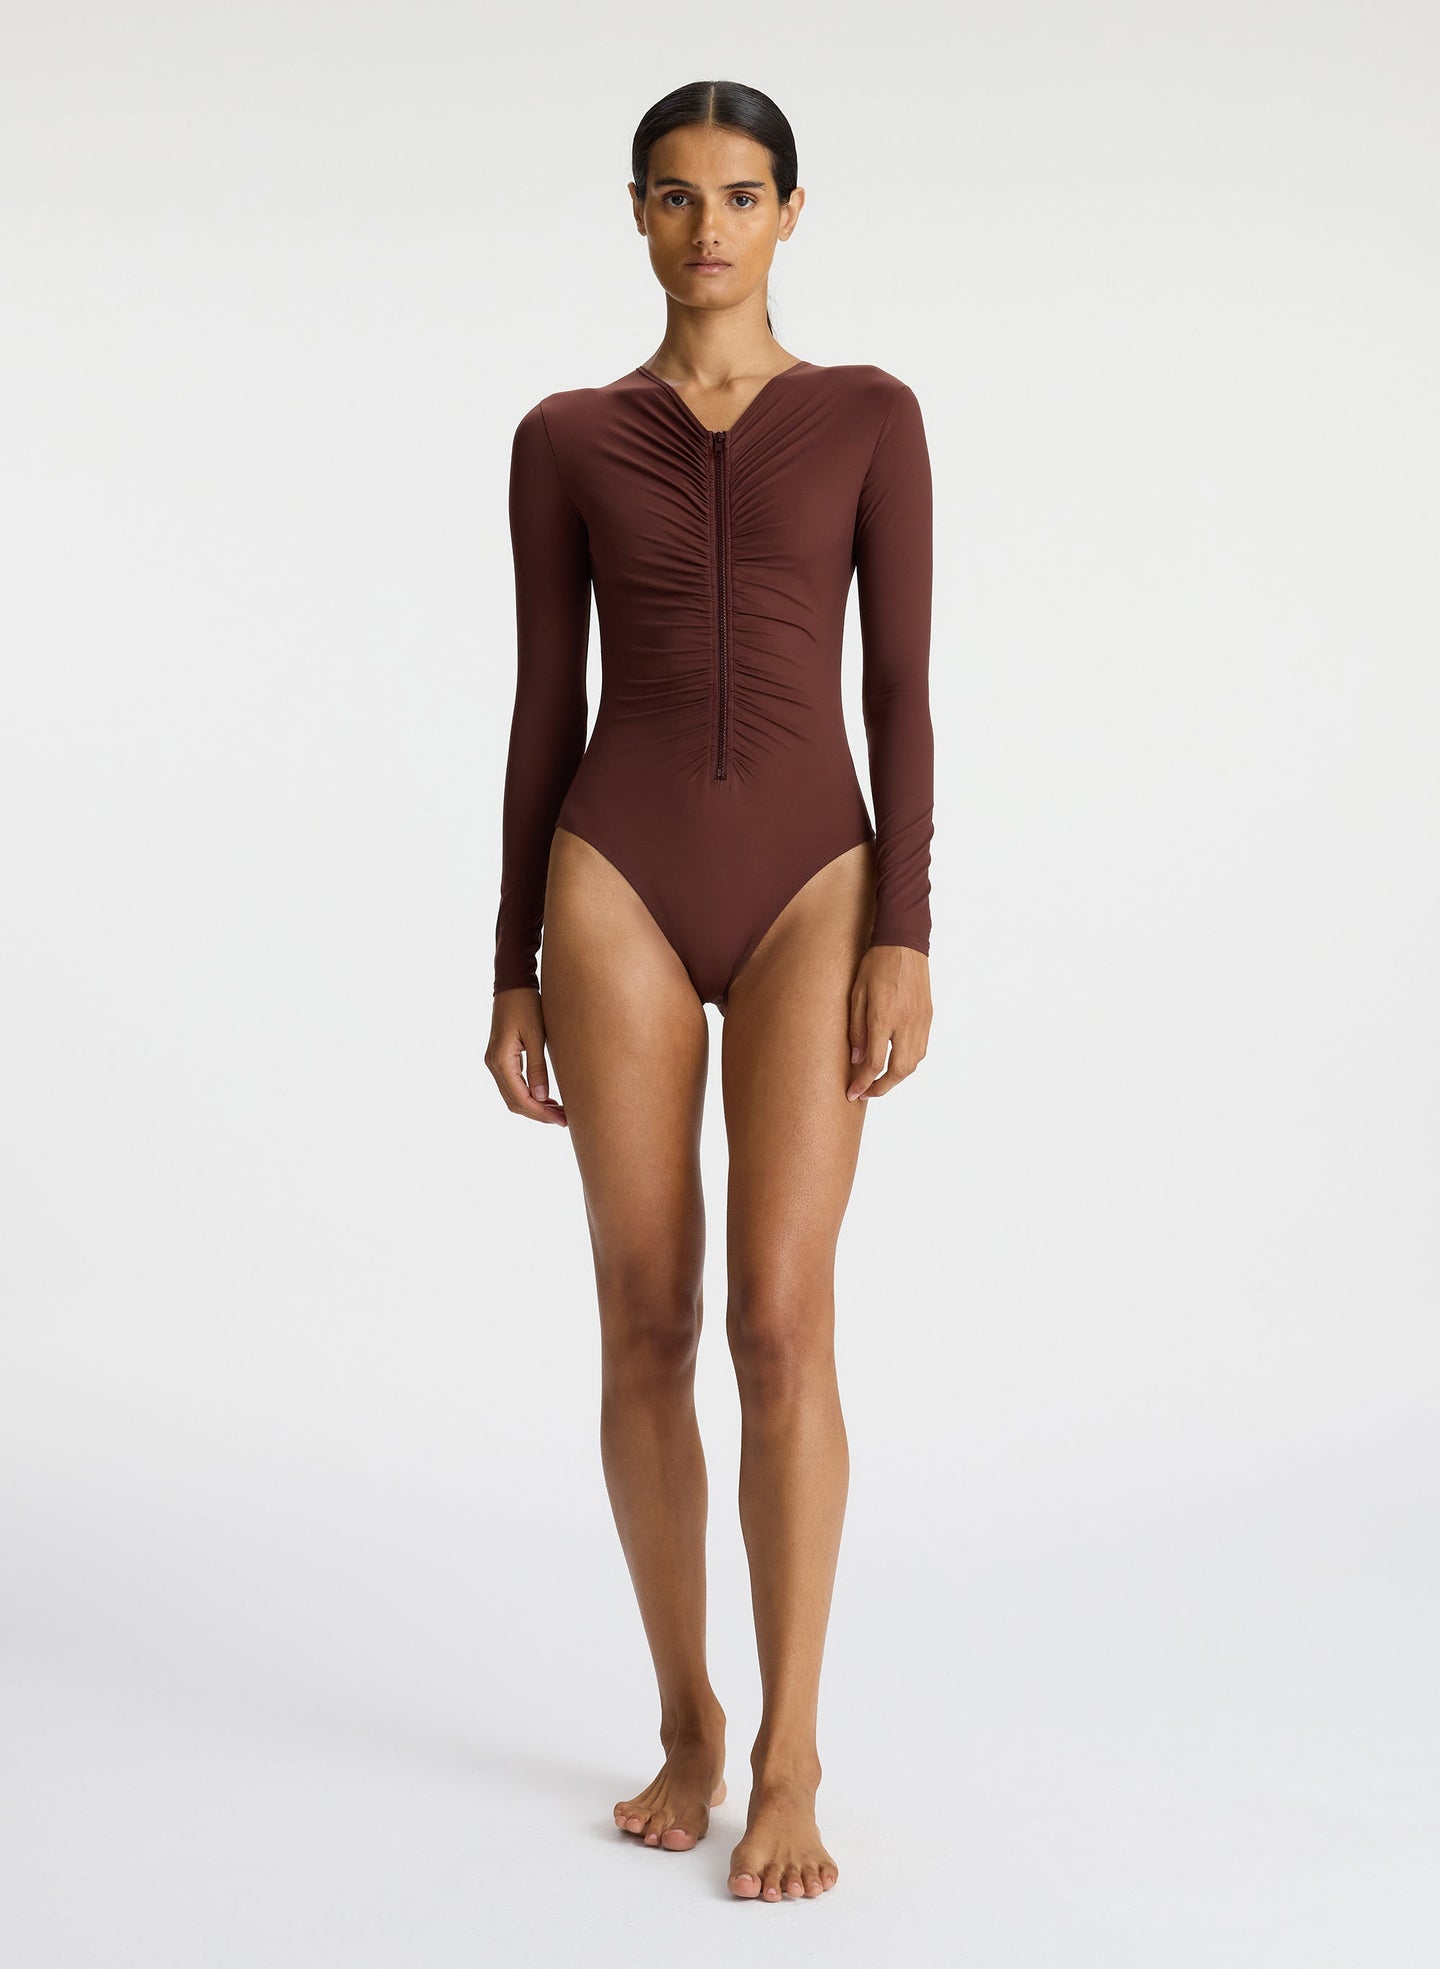 front view of woman wearing brown long sleeve zip front swimsuit